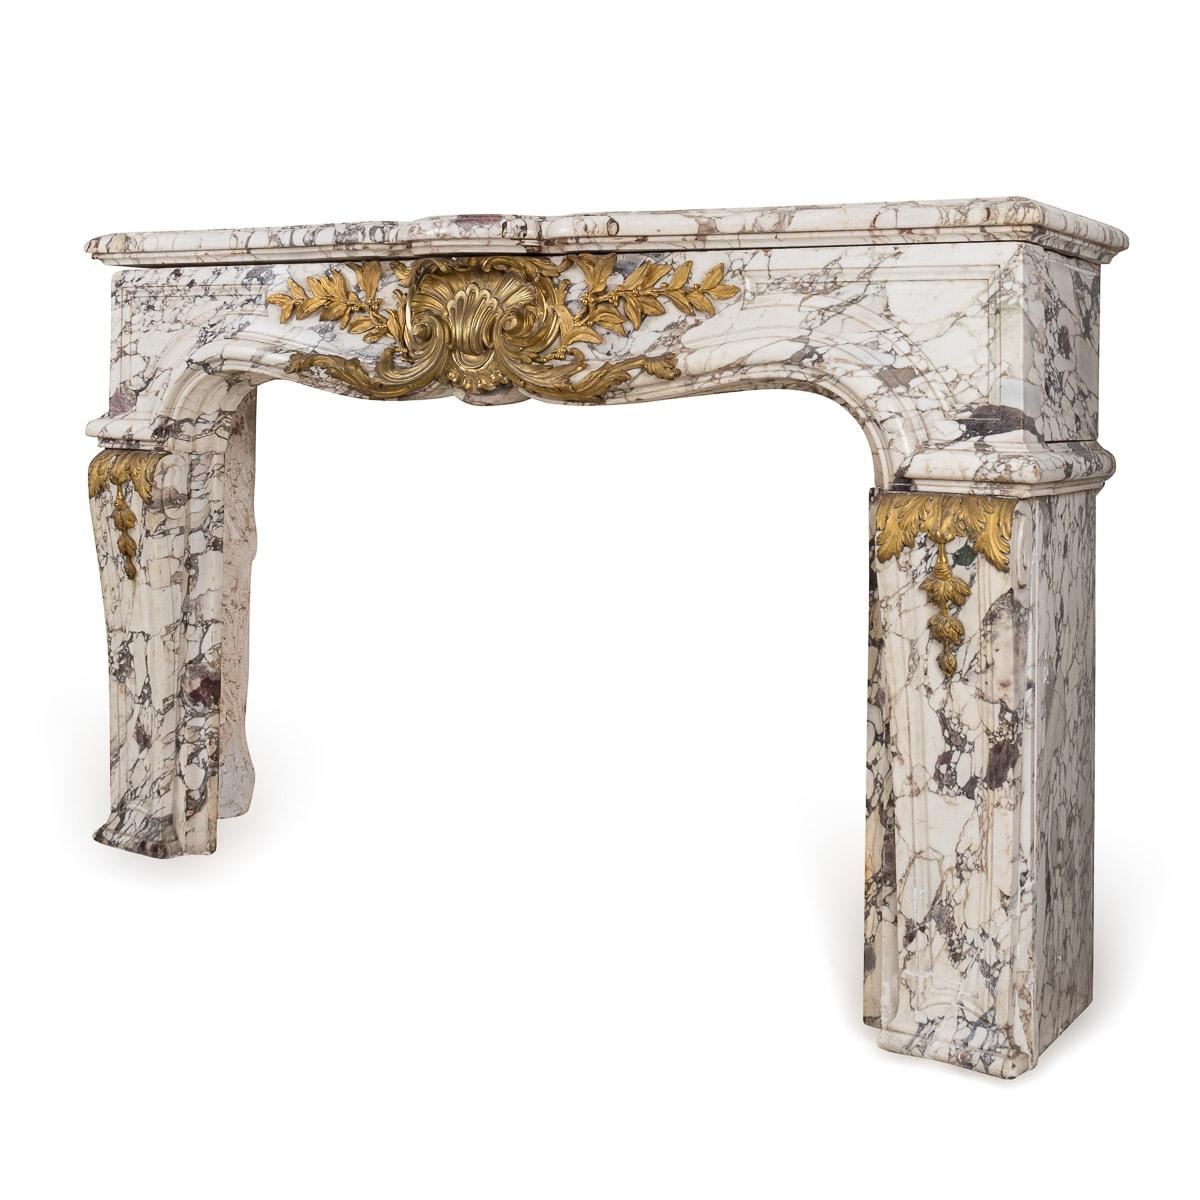 A mid 19th century French Louis XV style fireplace in Breche Violette marble. The curved shaped, stop-fluted jambs surmounted by ormolu mounted carved paterae, frieze and moulded shelf. This superb fireplace adds elegance and sophistication to any